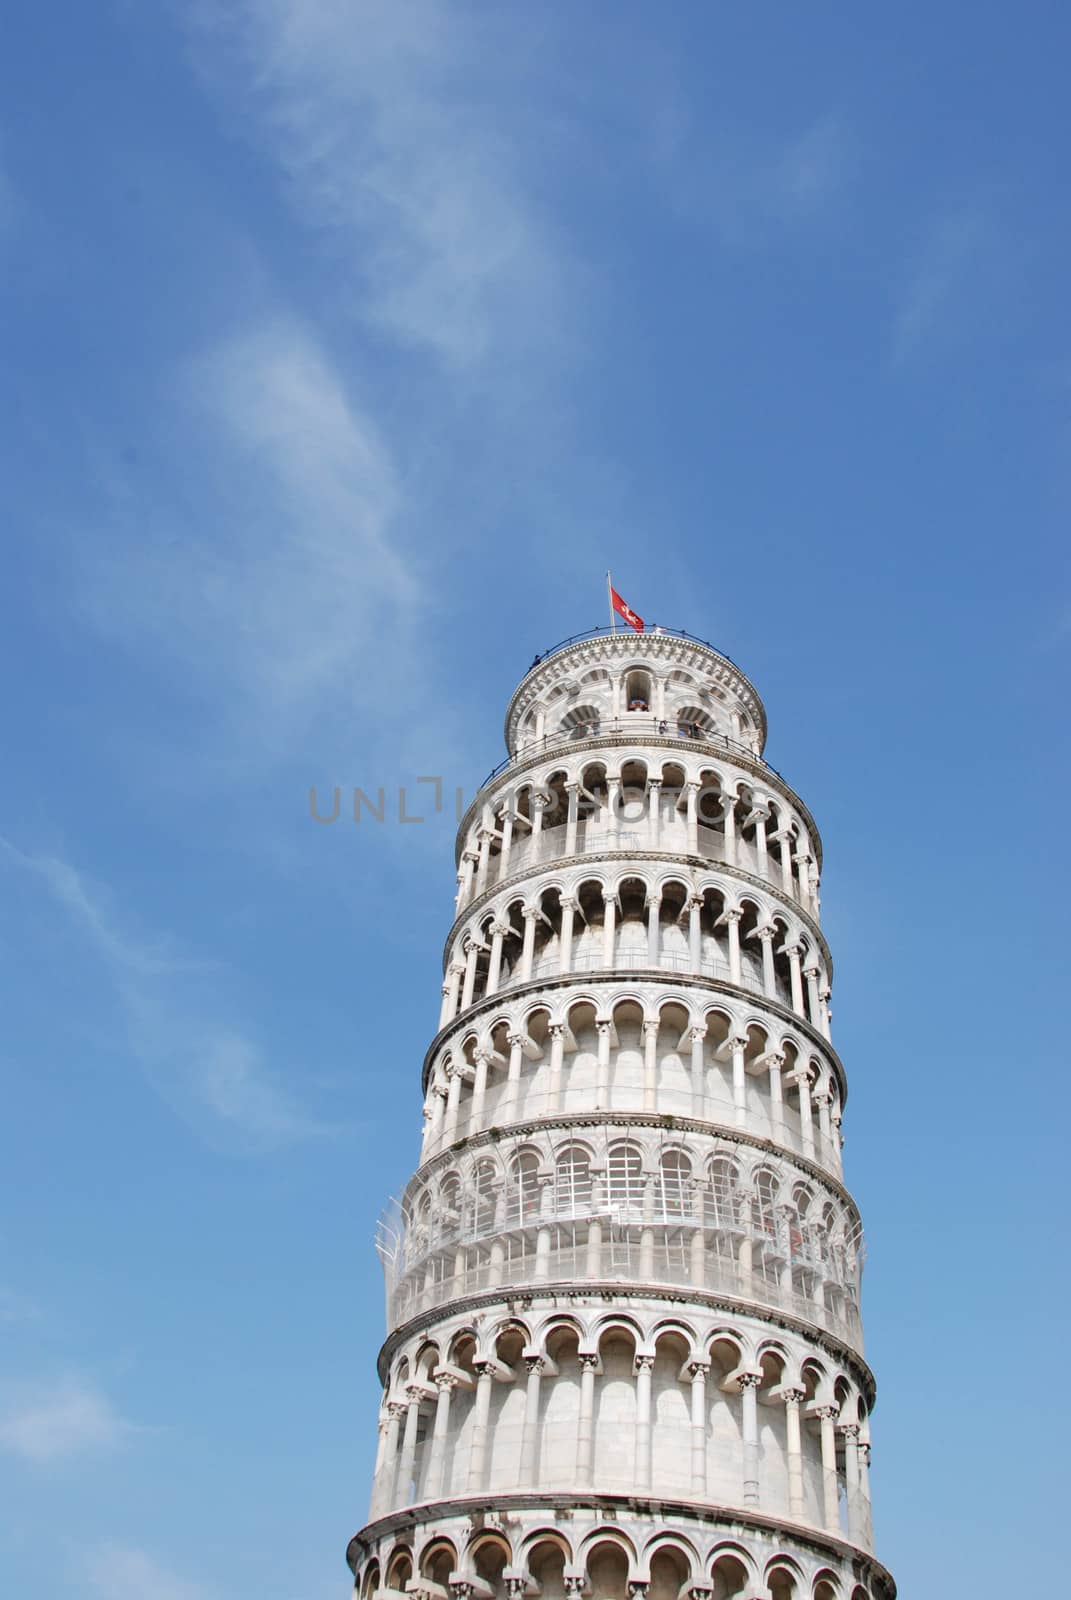 Leaning Tower of Pisa, Tuscany - Italy by cosca